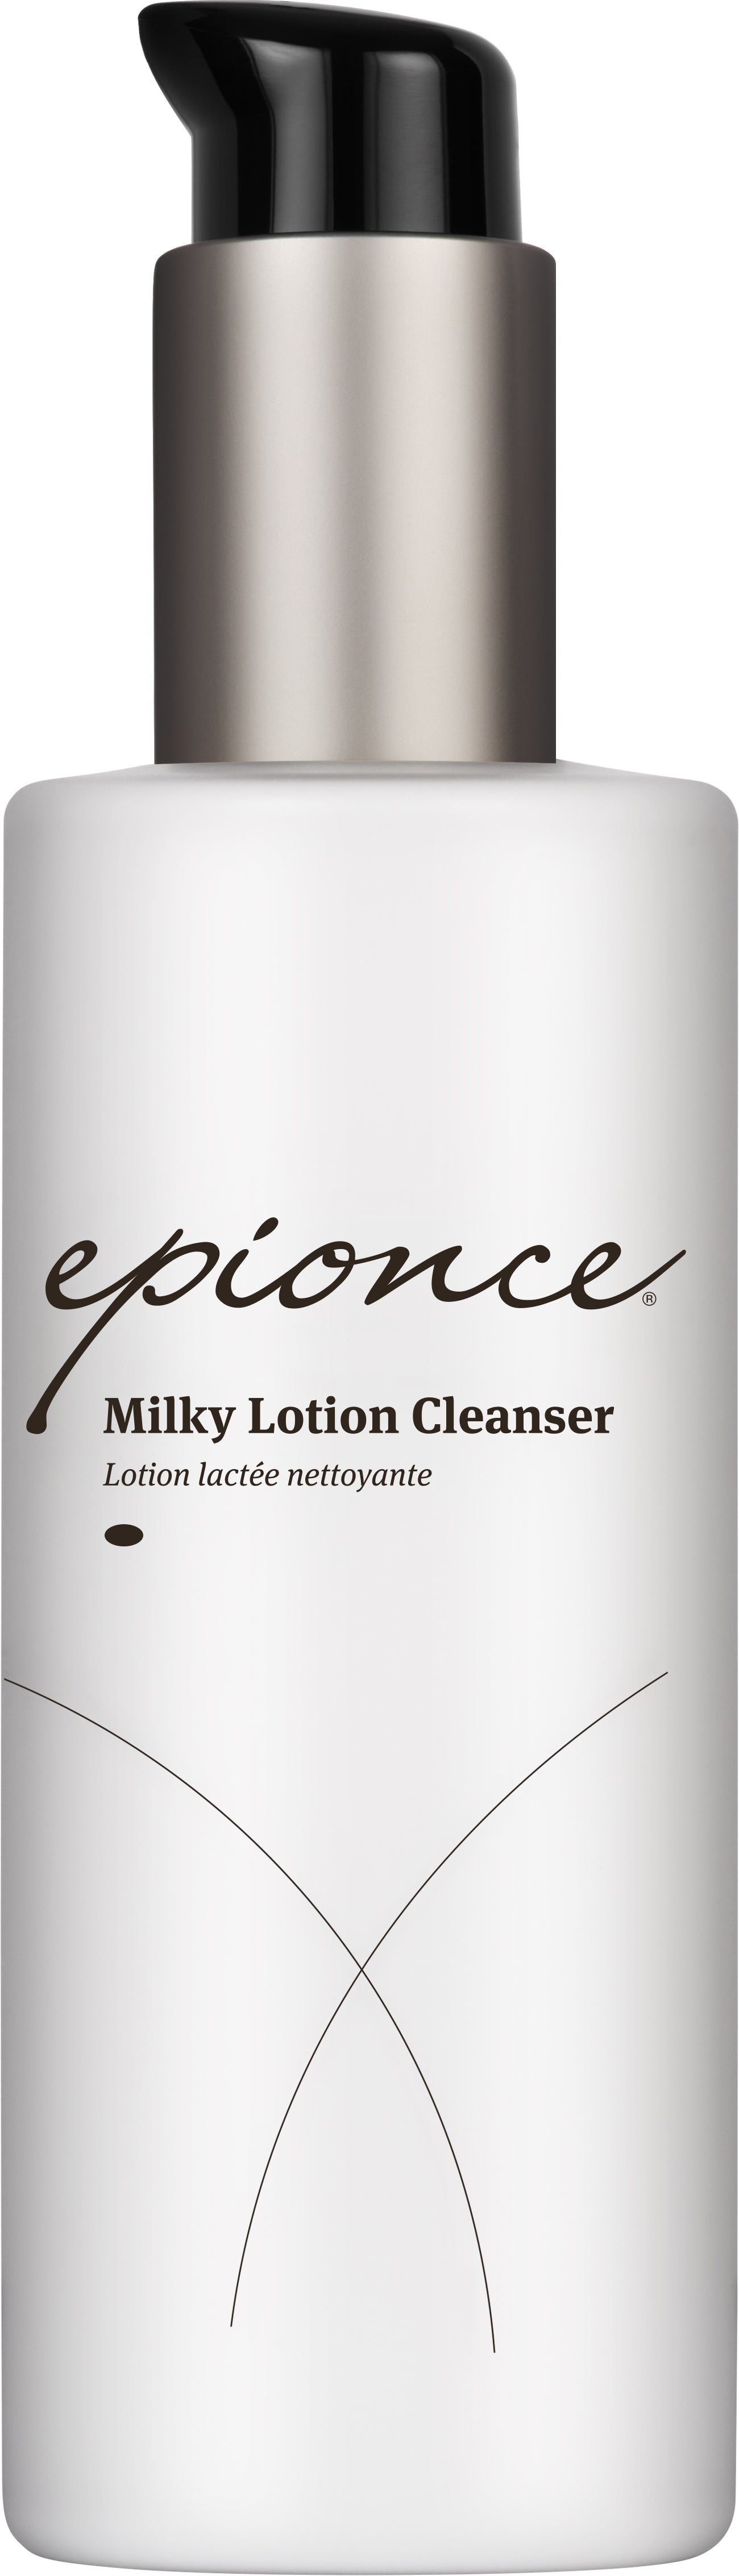 Epionce | Milky Lotion Cleanser (170ml)